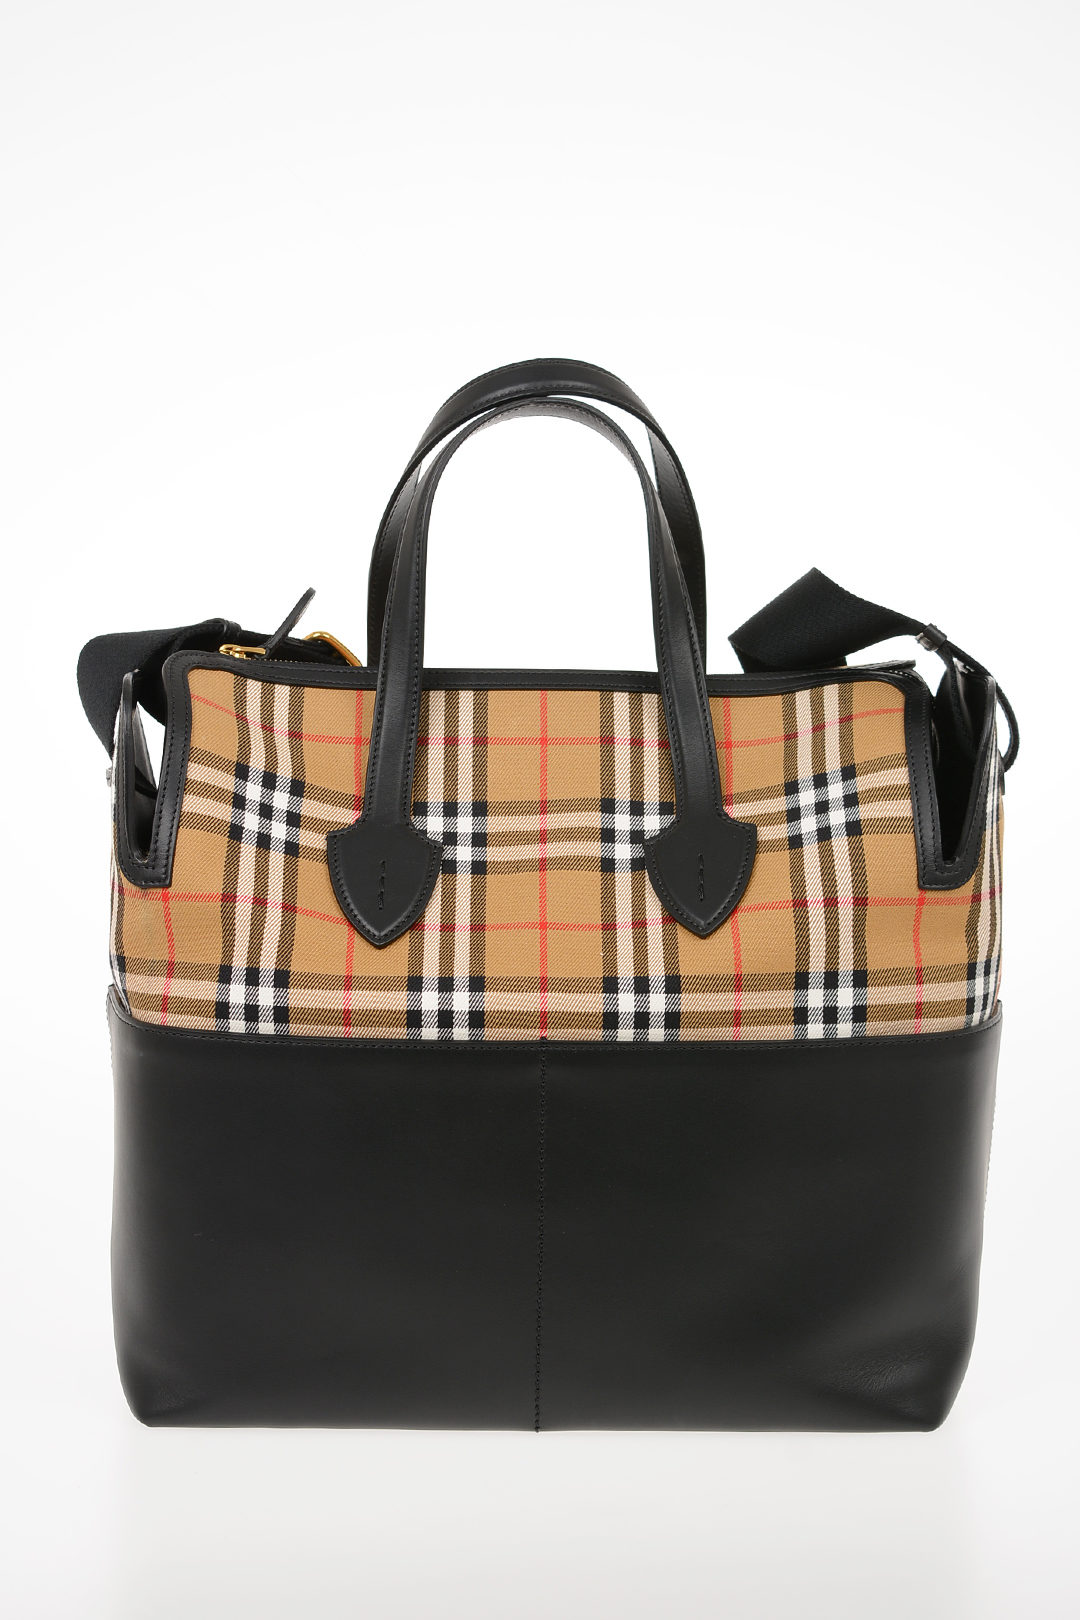 Burberry KIDS Leather Check Mummy Bag with changing table girls - Glamood  Outlet